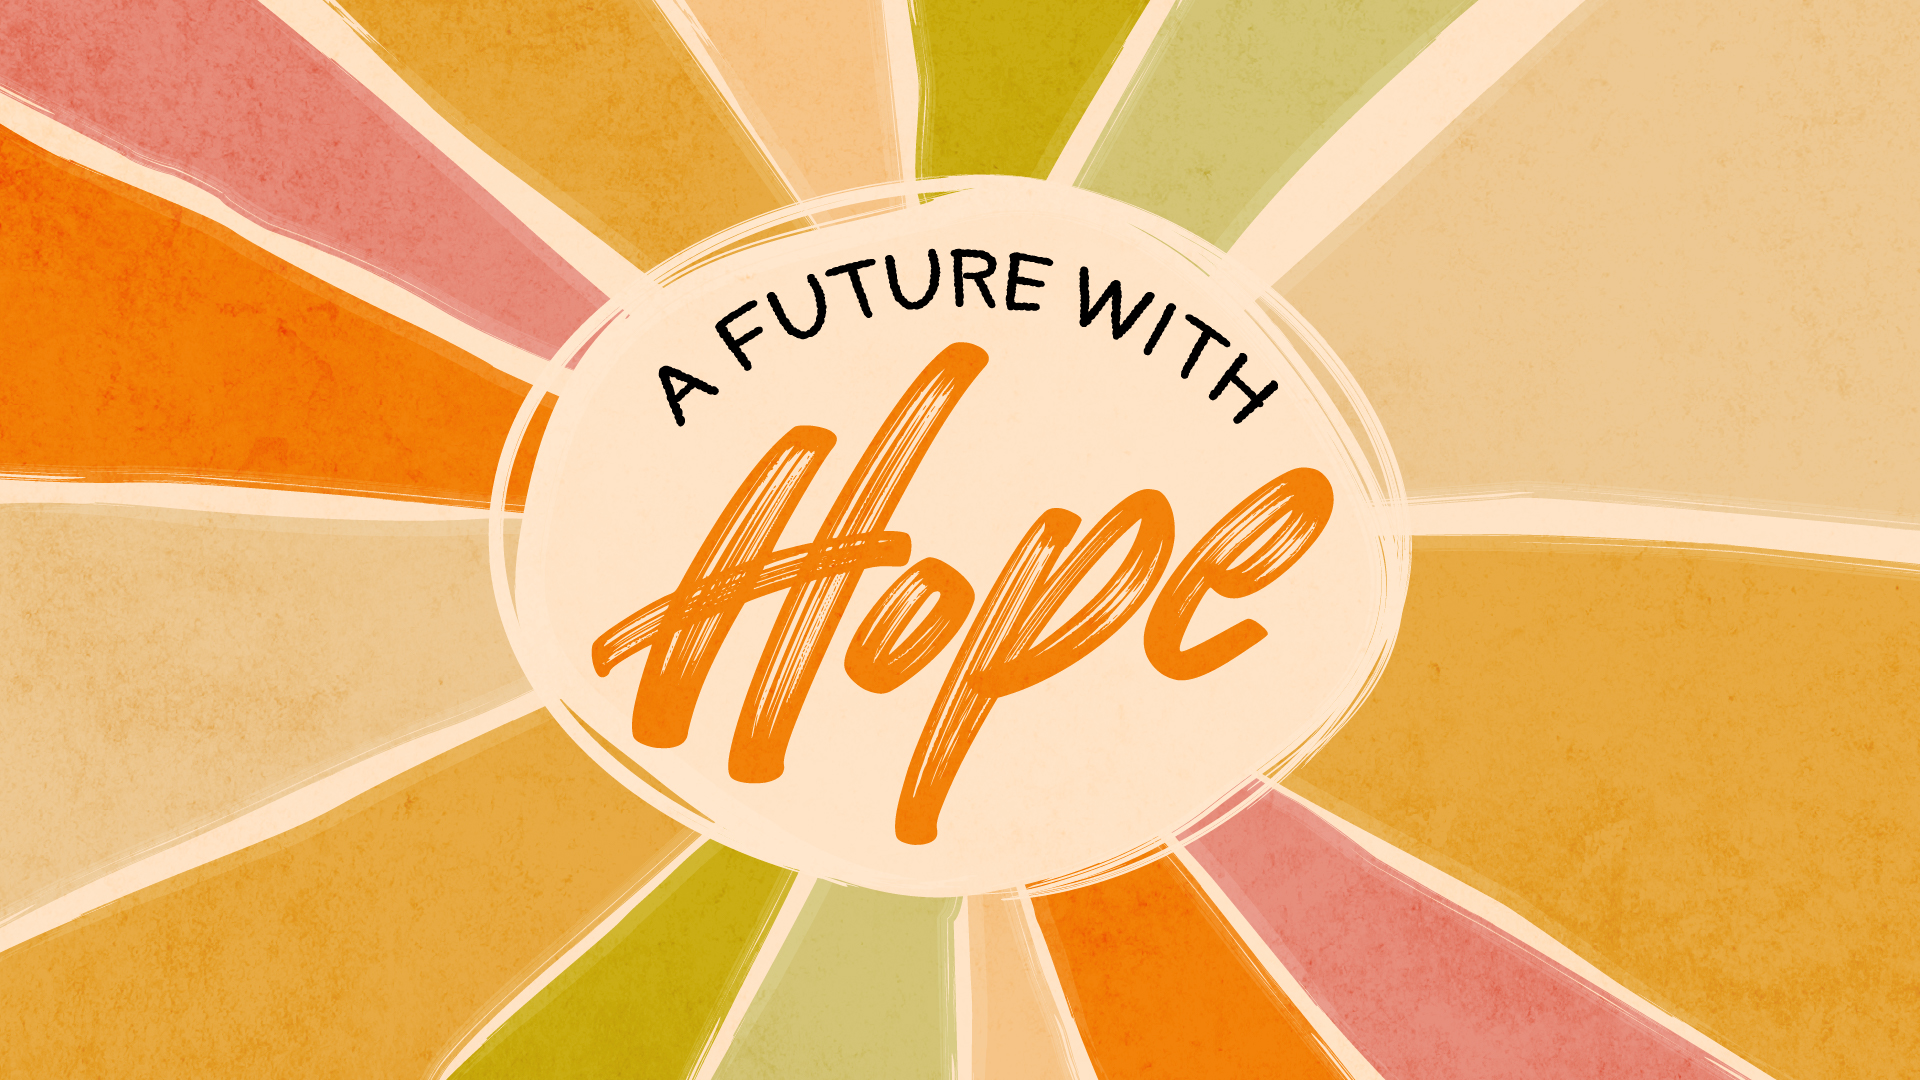 Sunday Worship: Perceiving A Future With Hope